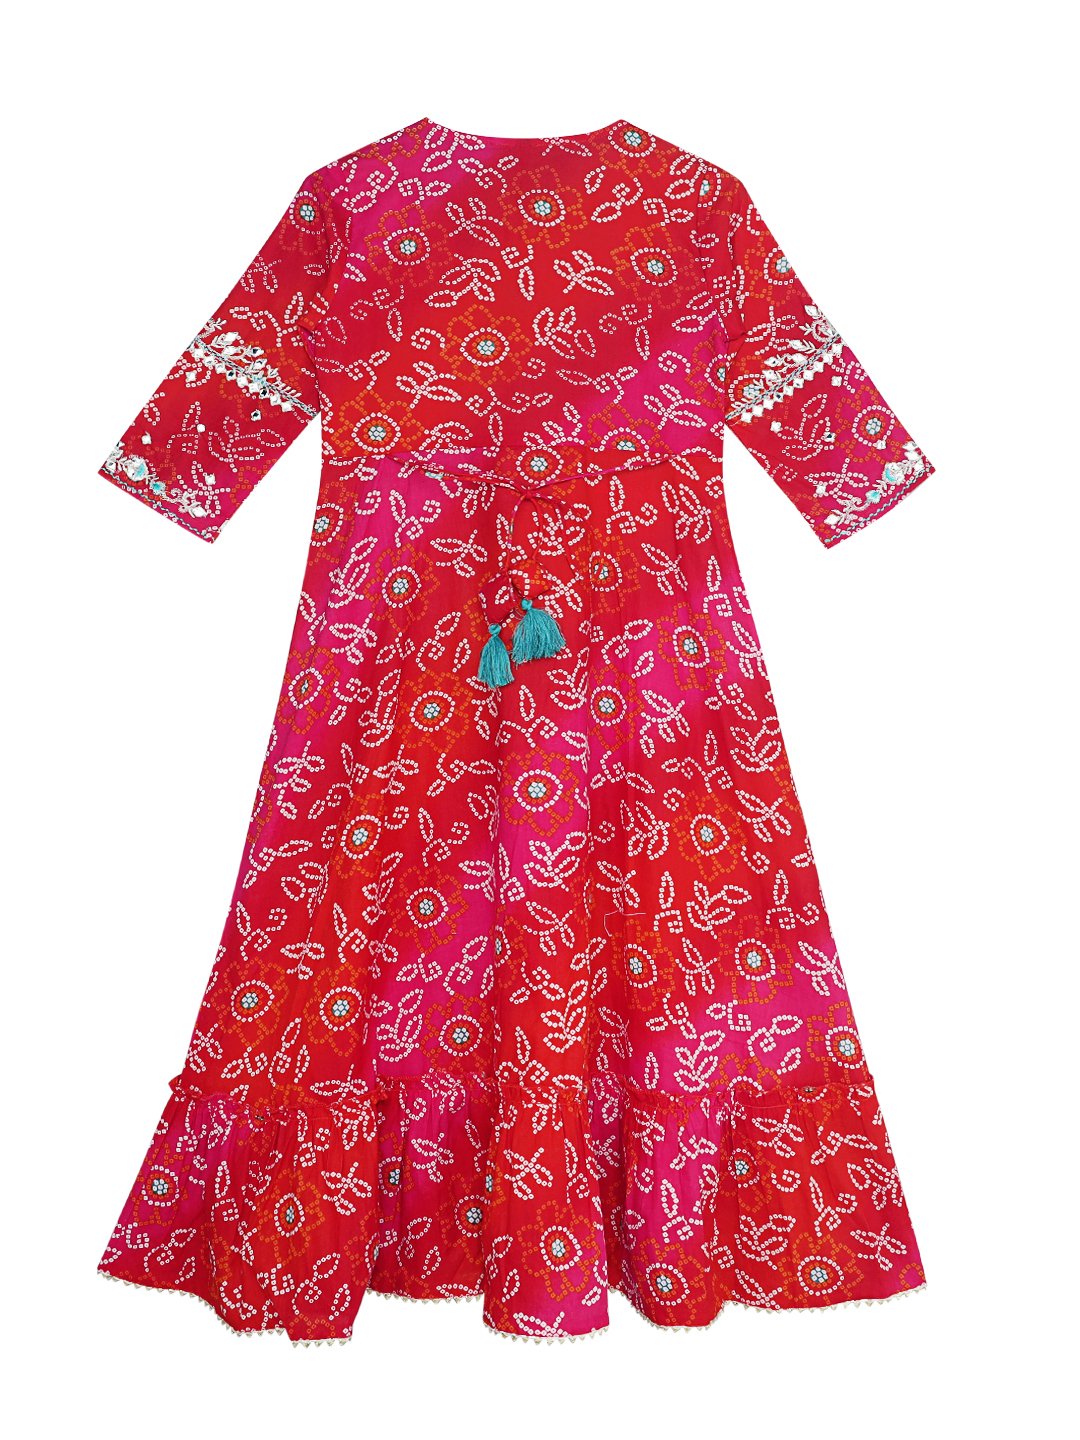 Ishin Girls Pink Embroidered Tiered Dress